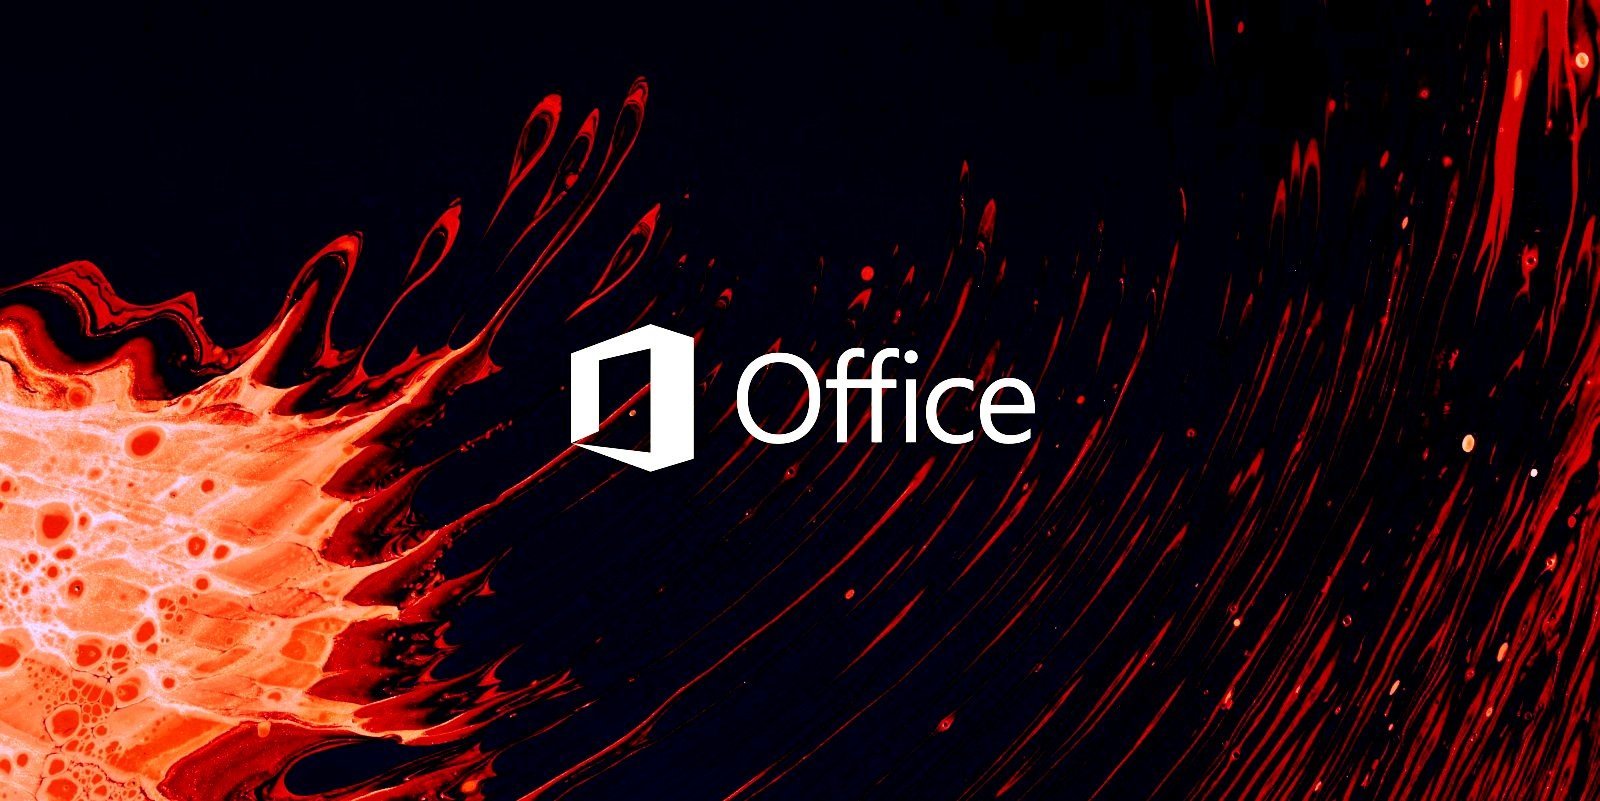 Microsoft Office update breaks actively exploited RCE attack chain – Source: www.bleepingcomputer.com